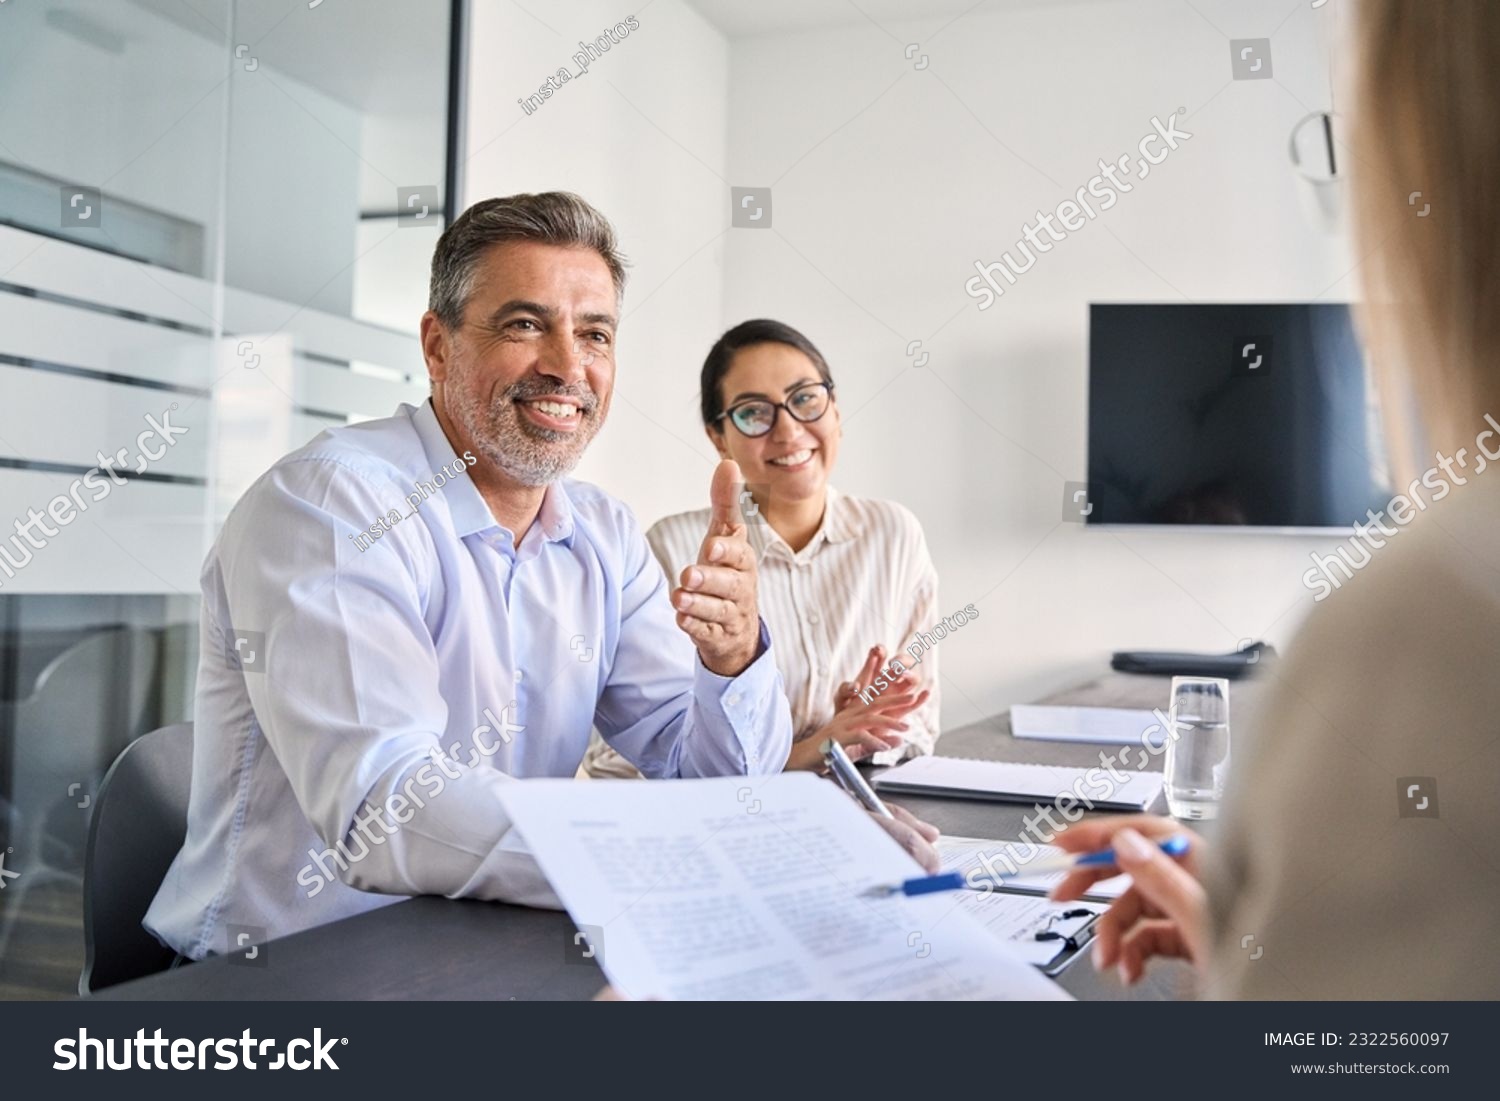 Smiling Latin manager working with diverse colleagues at team meeting. Happy diverse business people international corporate executives talking at group briefing, collaborating at boardroom table. #2322560097